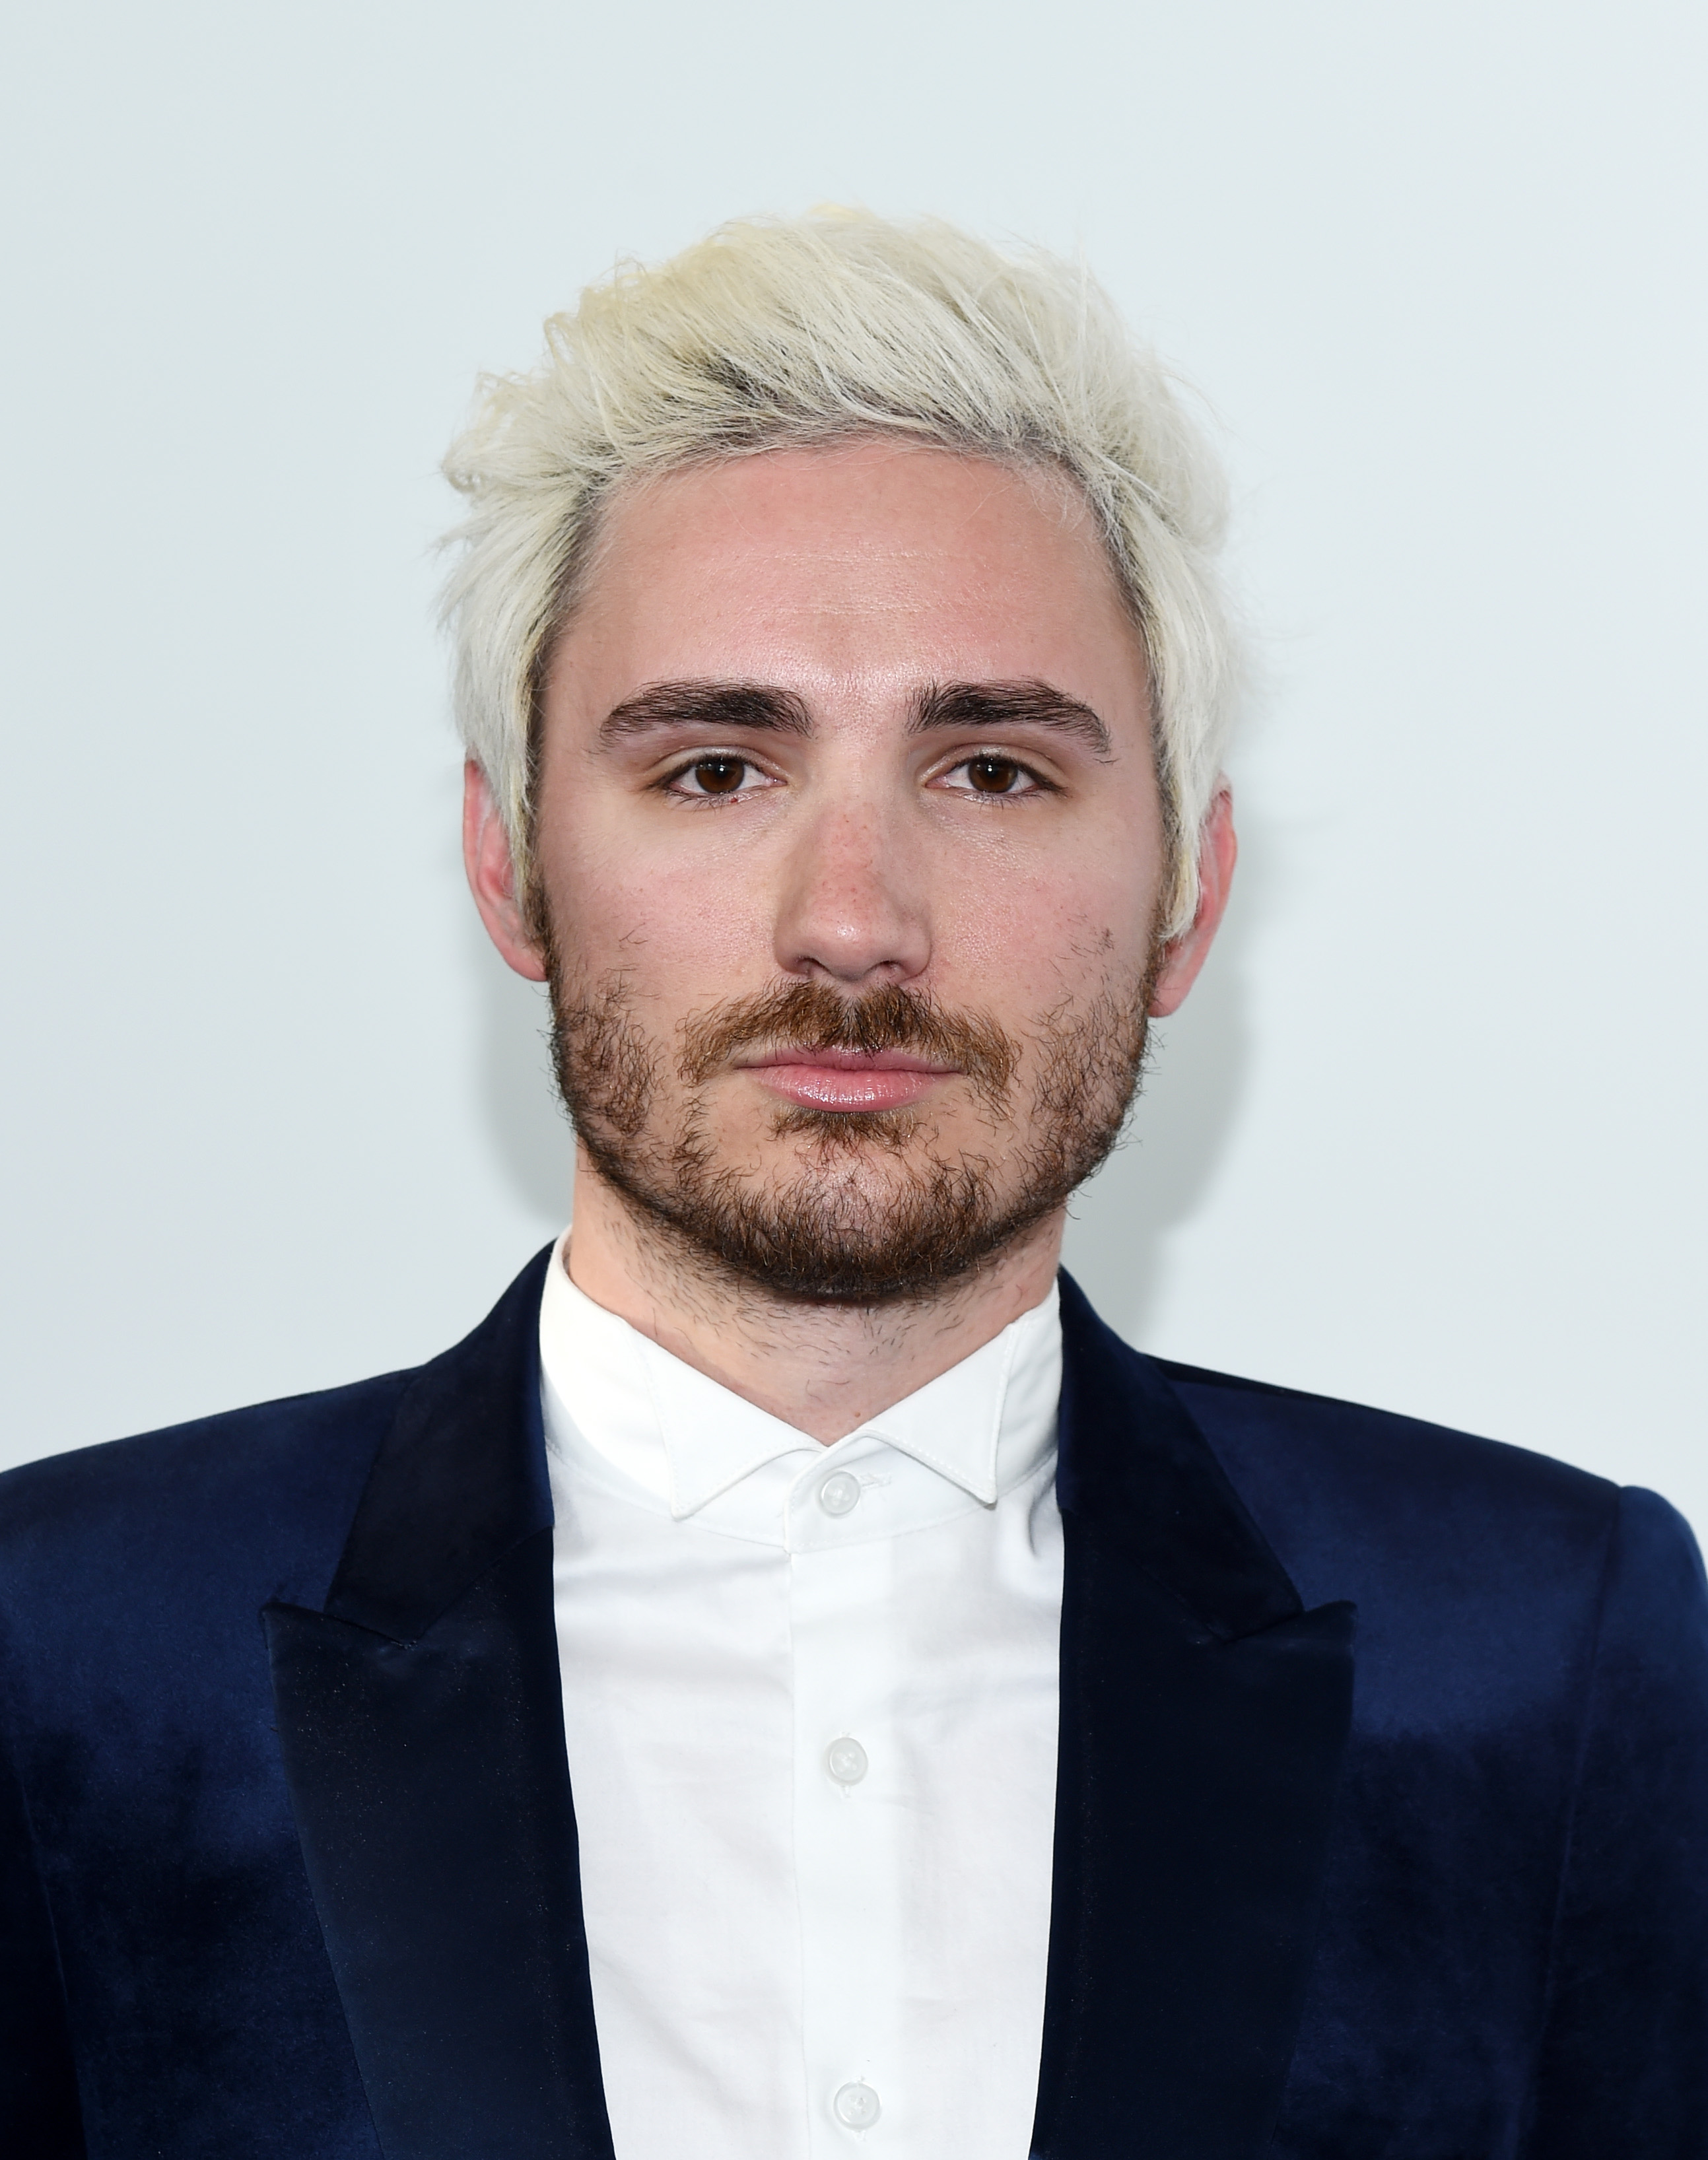 Sam Greisman at The Human Rights Campaign 2019 Los Angeles dinner in Los Angeles, California on March 30, 2019 | Source: Getty Images